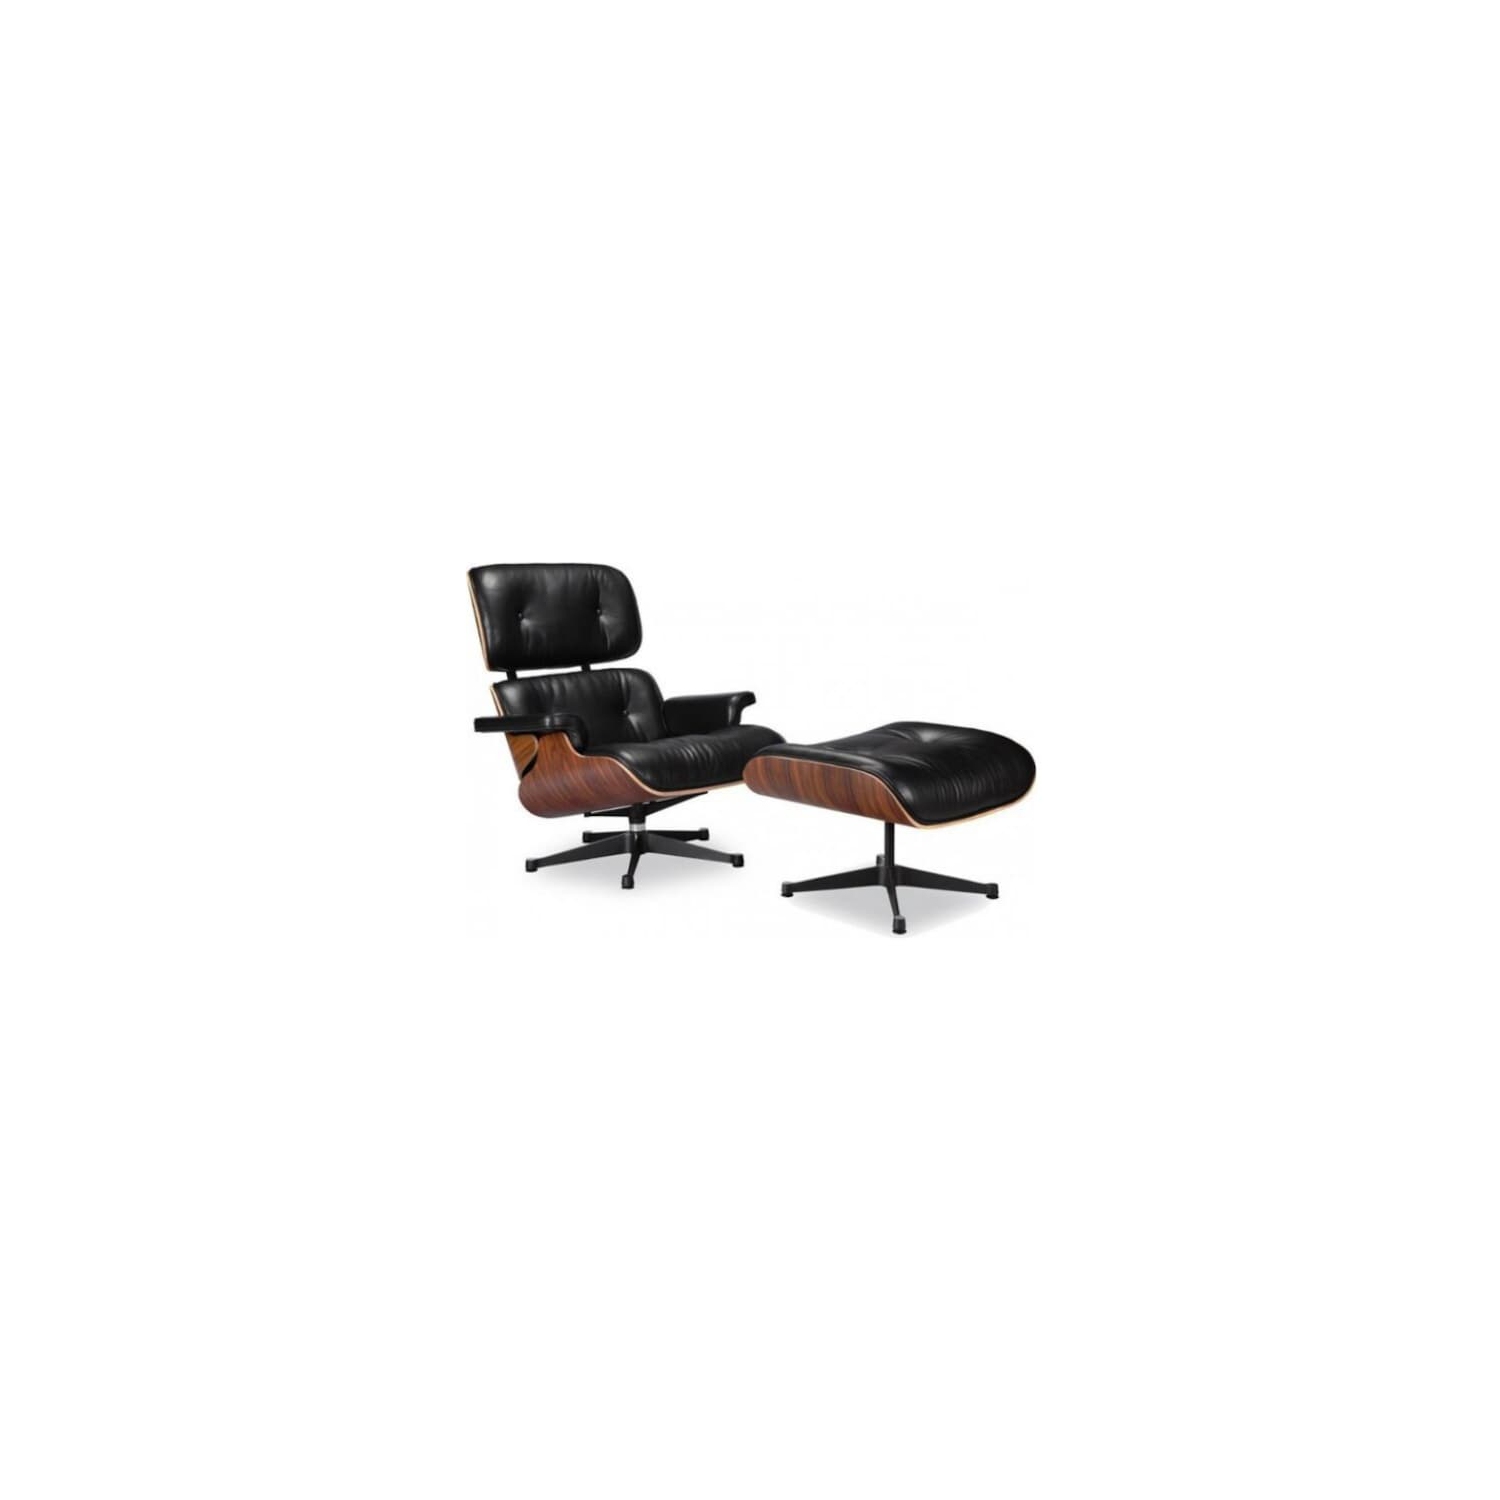 28 New Chair and ottoman ap8101bk rw for Office Room